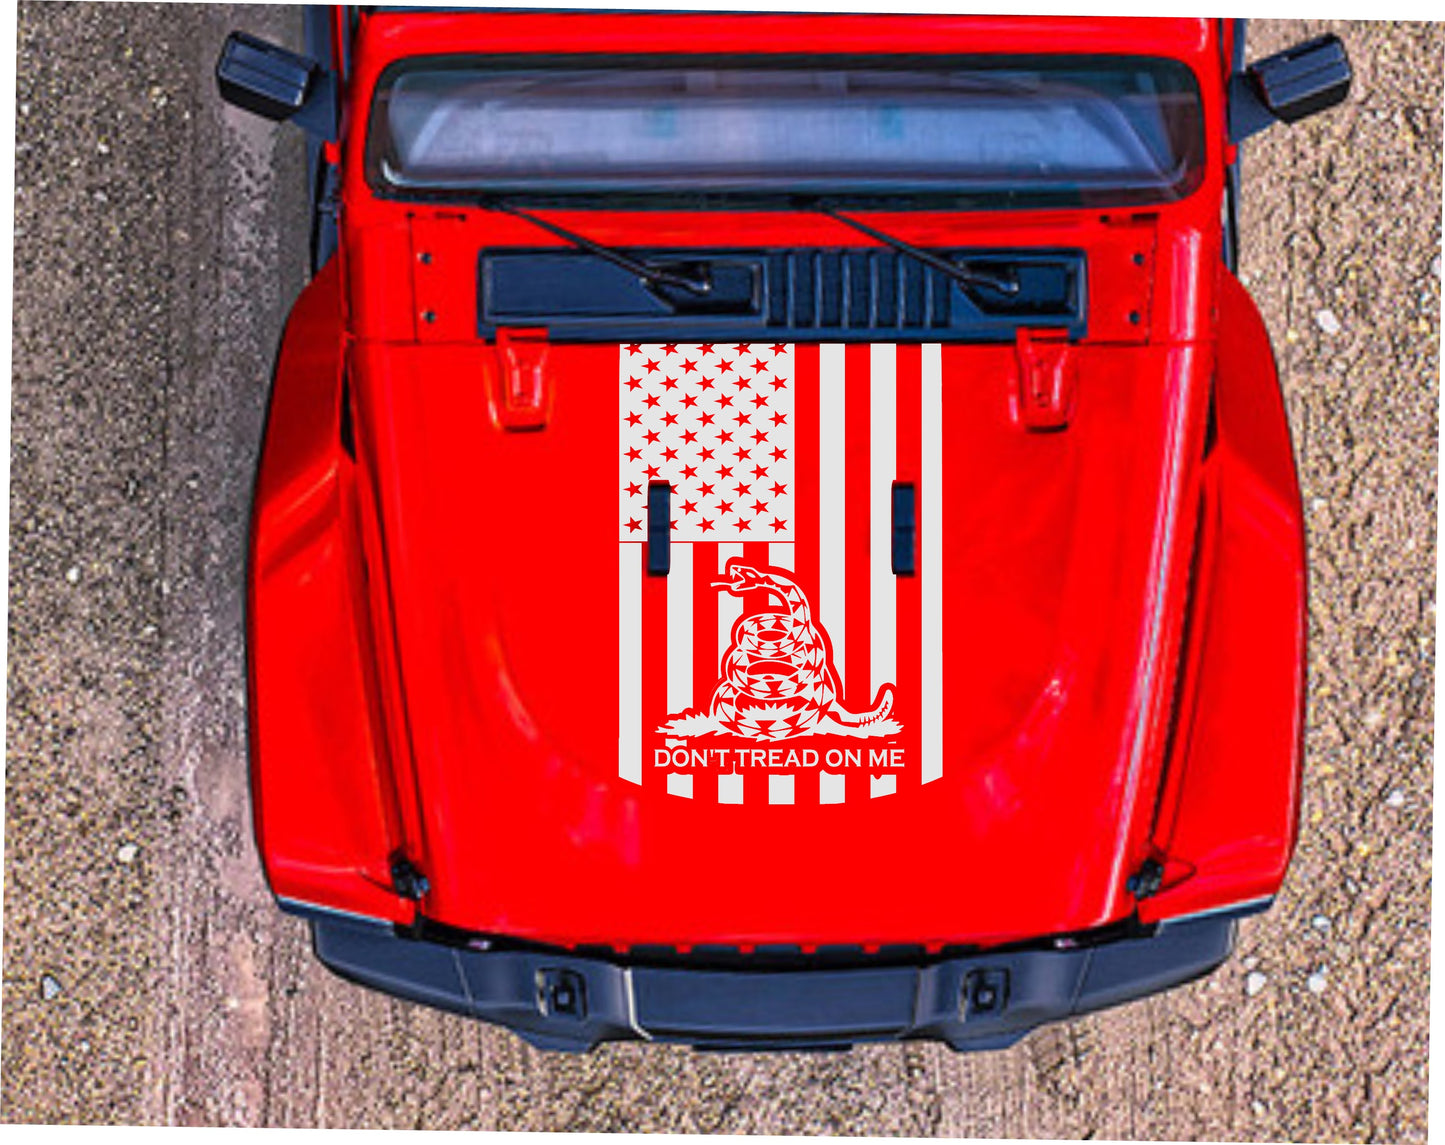 American Flag-Don't Tread On Me Hood Decal for Trucks, Jeeps, Cars. Sizes Available.